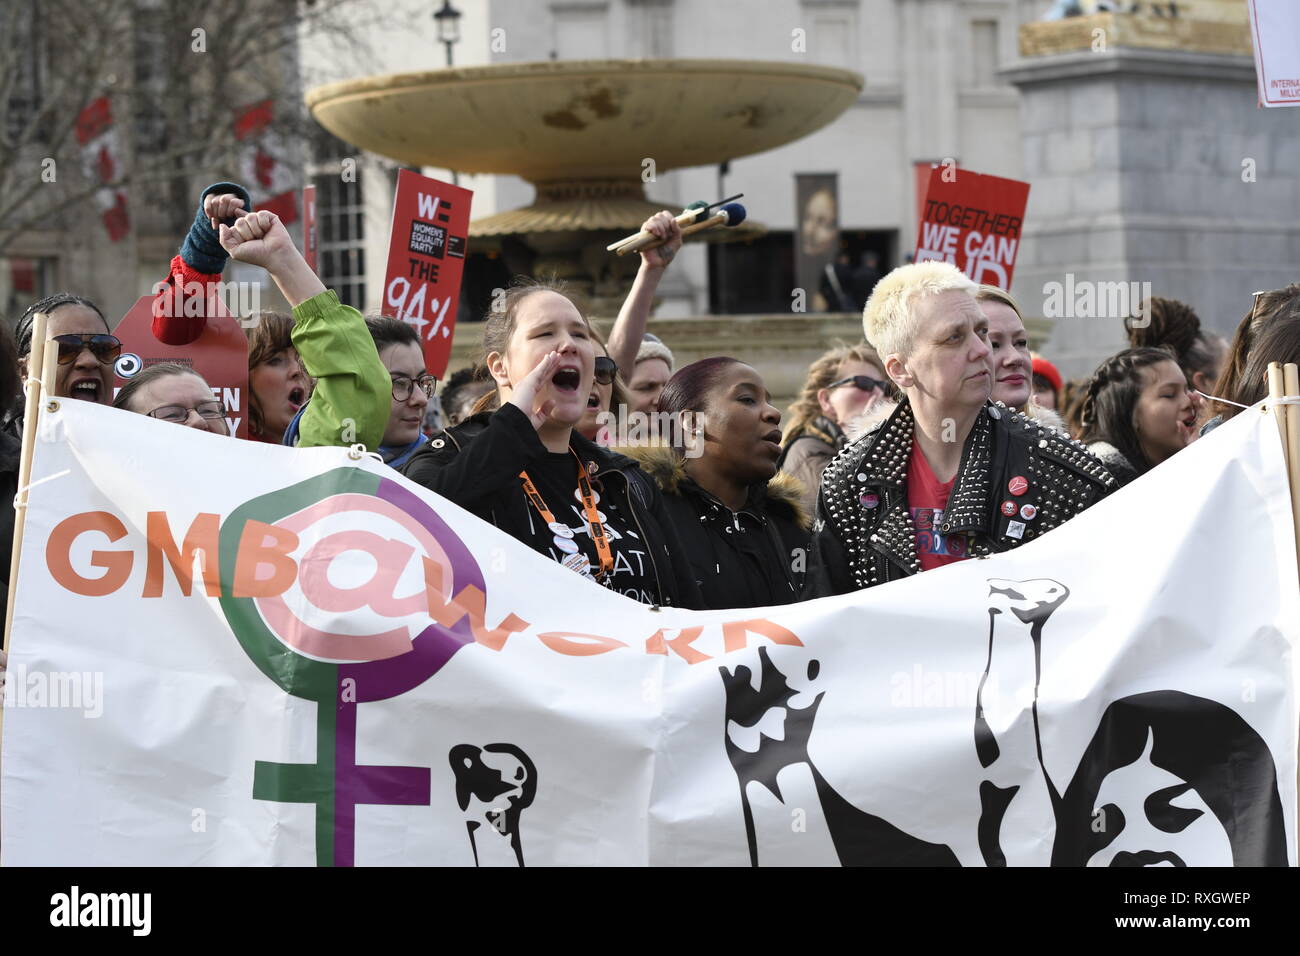 London, Greater London, UK. 9th Mar, 2019. Women seen shouting slogans while holding a large banner during the Million women's rise march in London.Thousands of women marched through central London to a rally in Trafalgar Square in London demanding freedom and justice and the end of male violence against them. ''˜Never Forgotten' was the theme for this year's march and participants commemorated the lives of girls and women who have been killed by mens's violence. Credit: Andres Pantoja/SOPA Images/ZUMA Wire/Alamy Live News Stock Photo